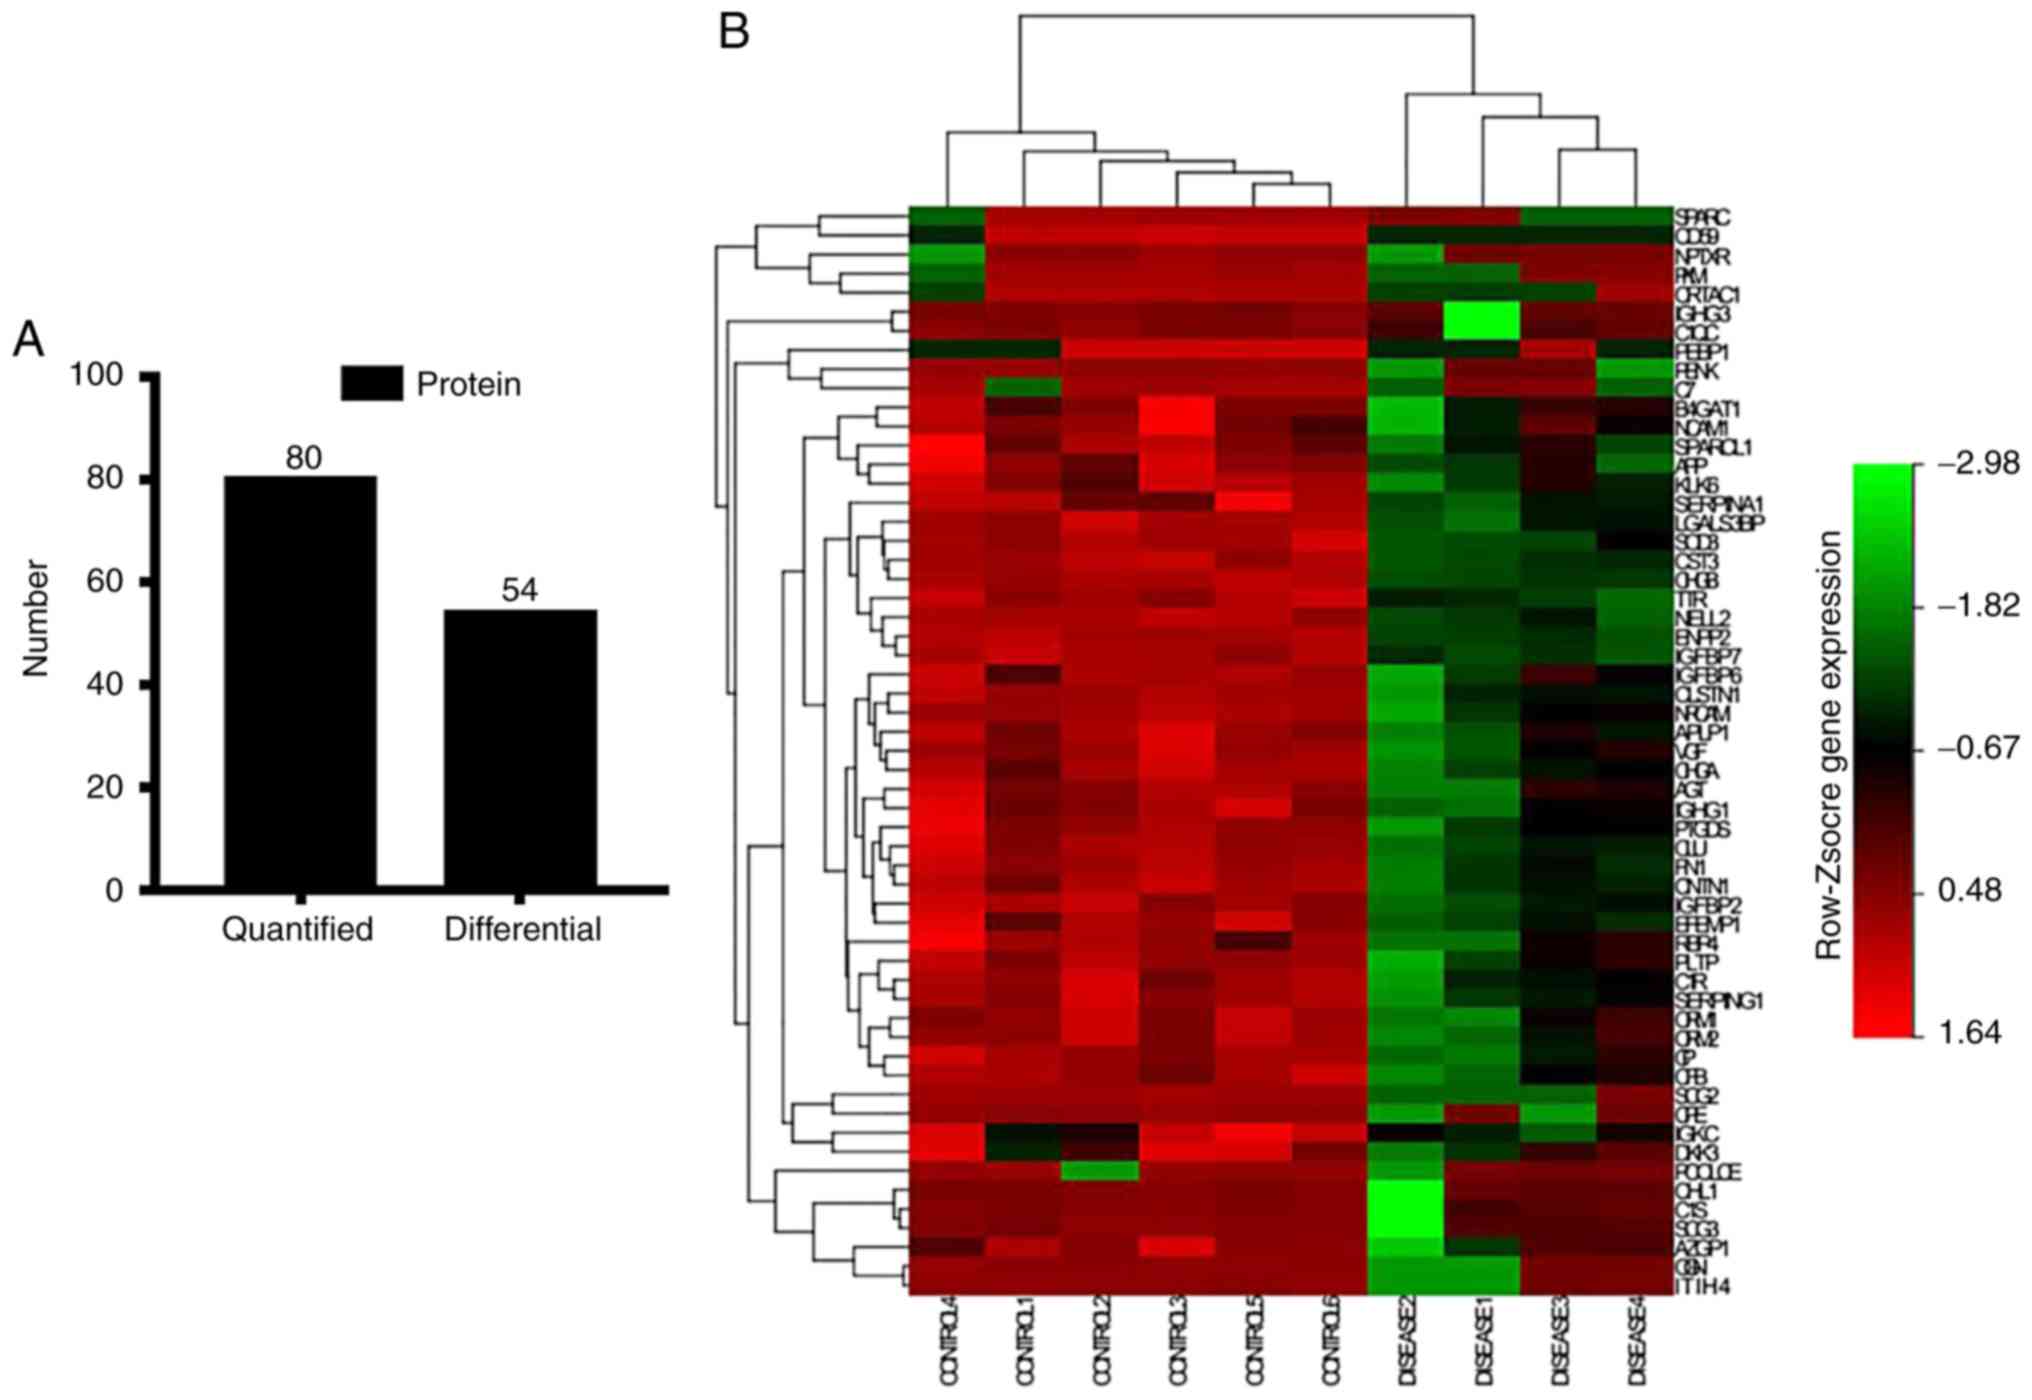 Quantitative proteomic analysis of cerebrospinal fluid from patients